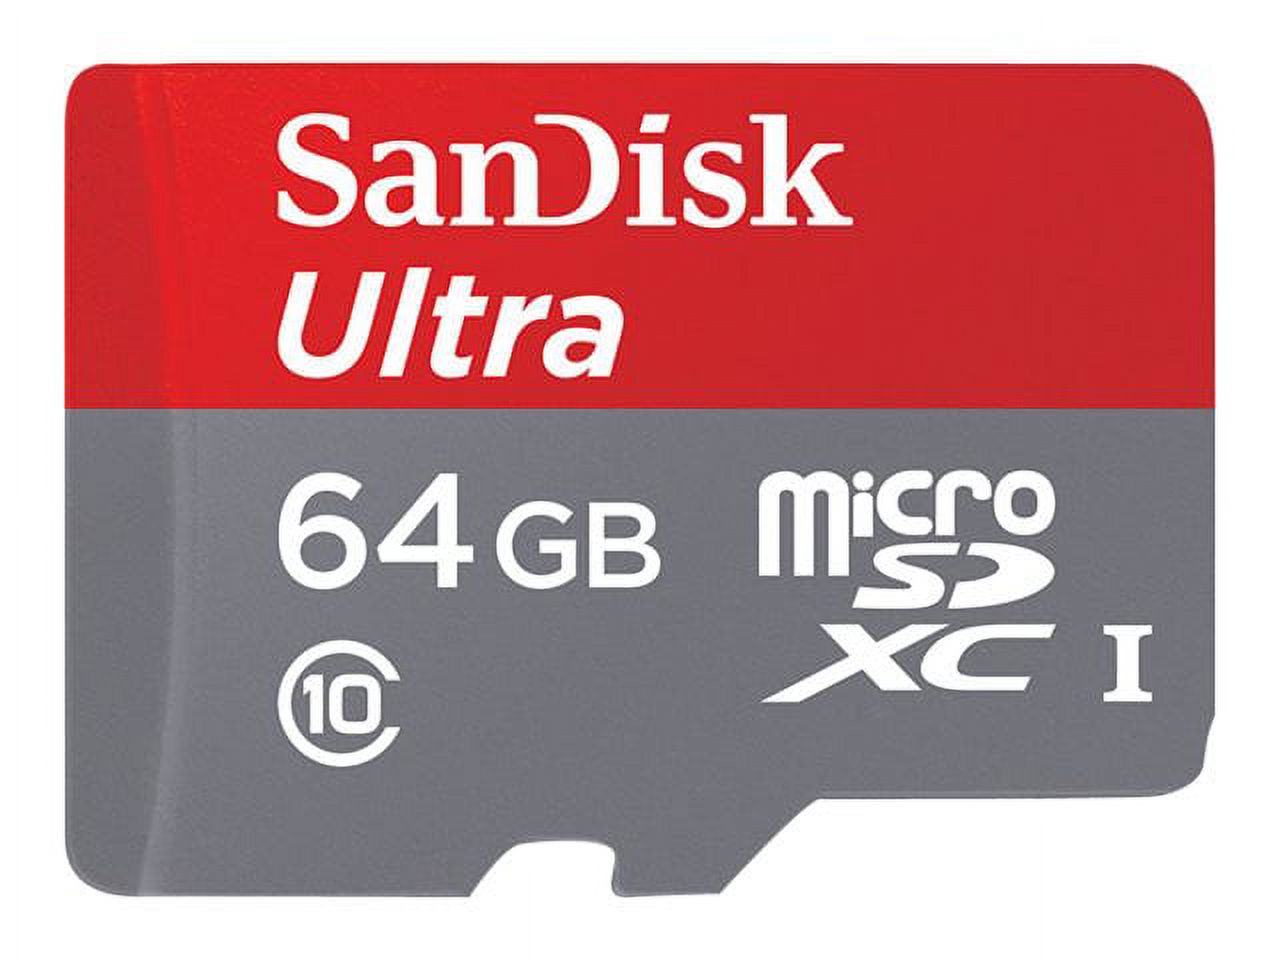 SanDisk Ultra plus MicroSD UHS-I Card for Cameras - image 5 of 6